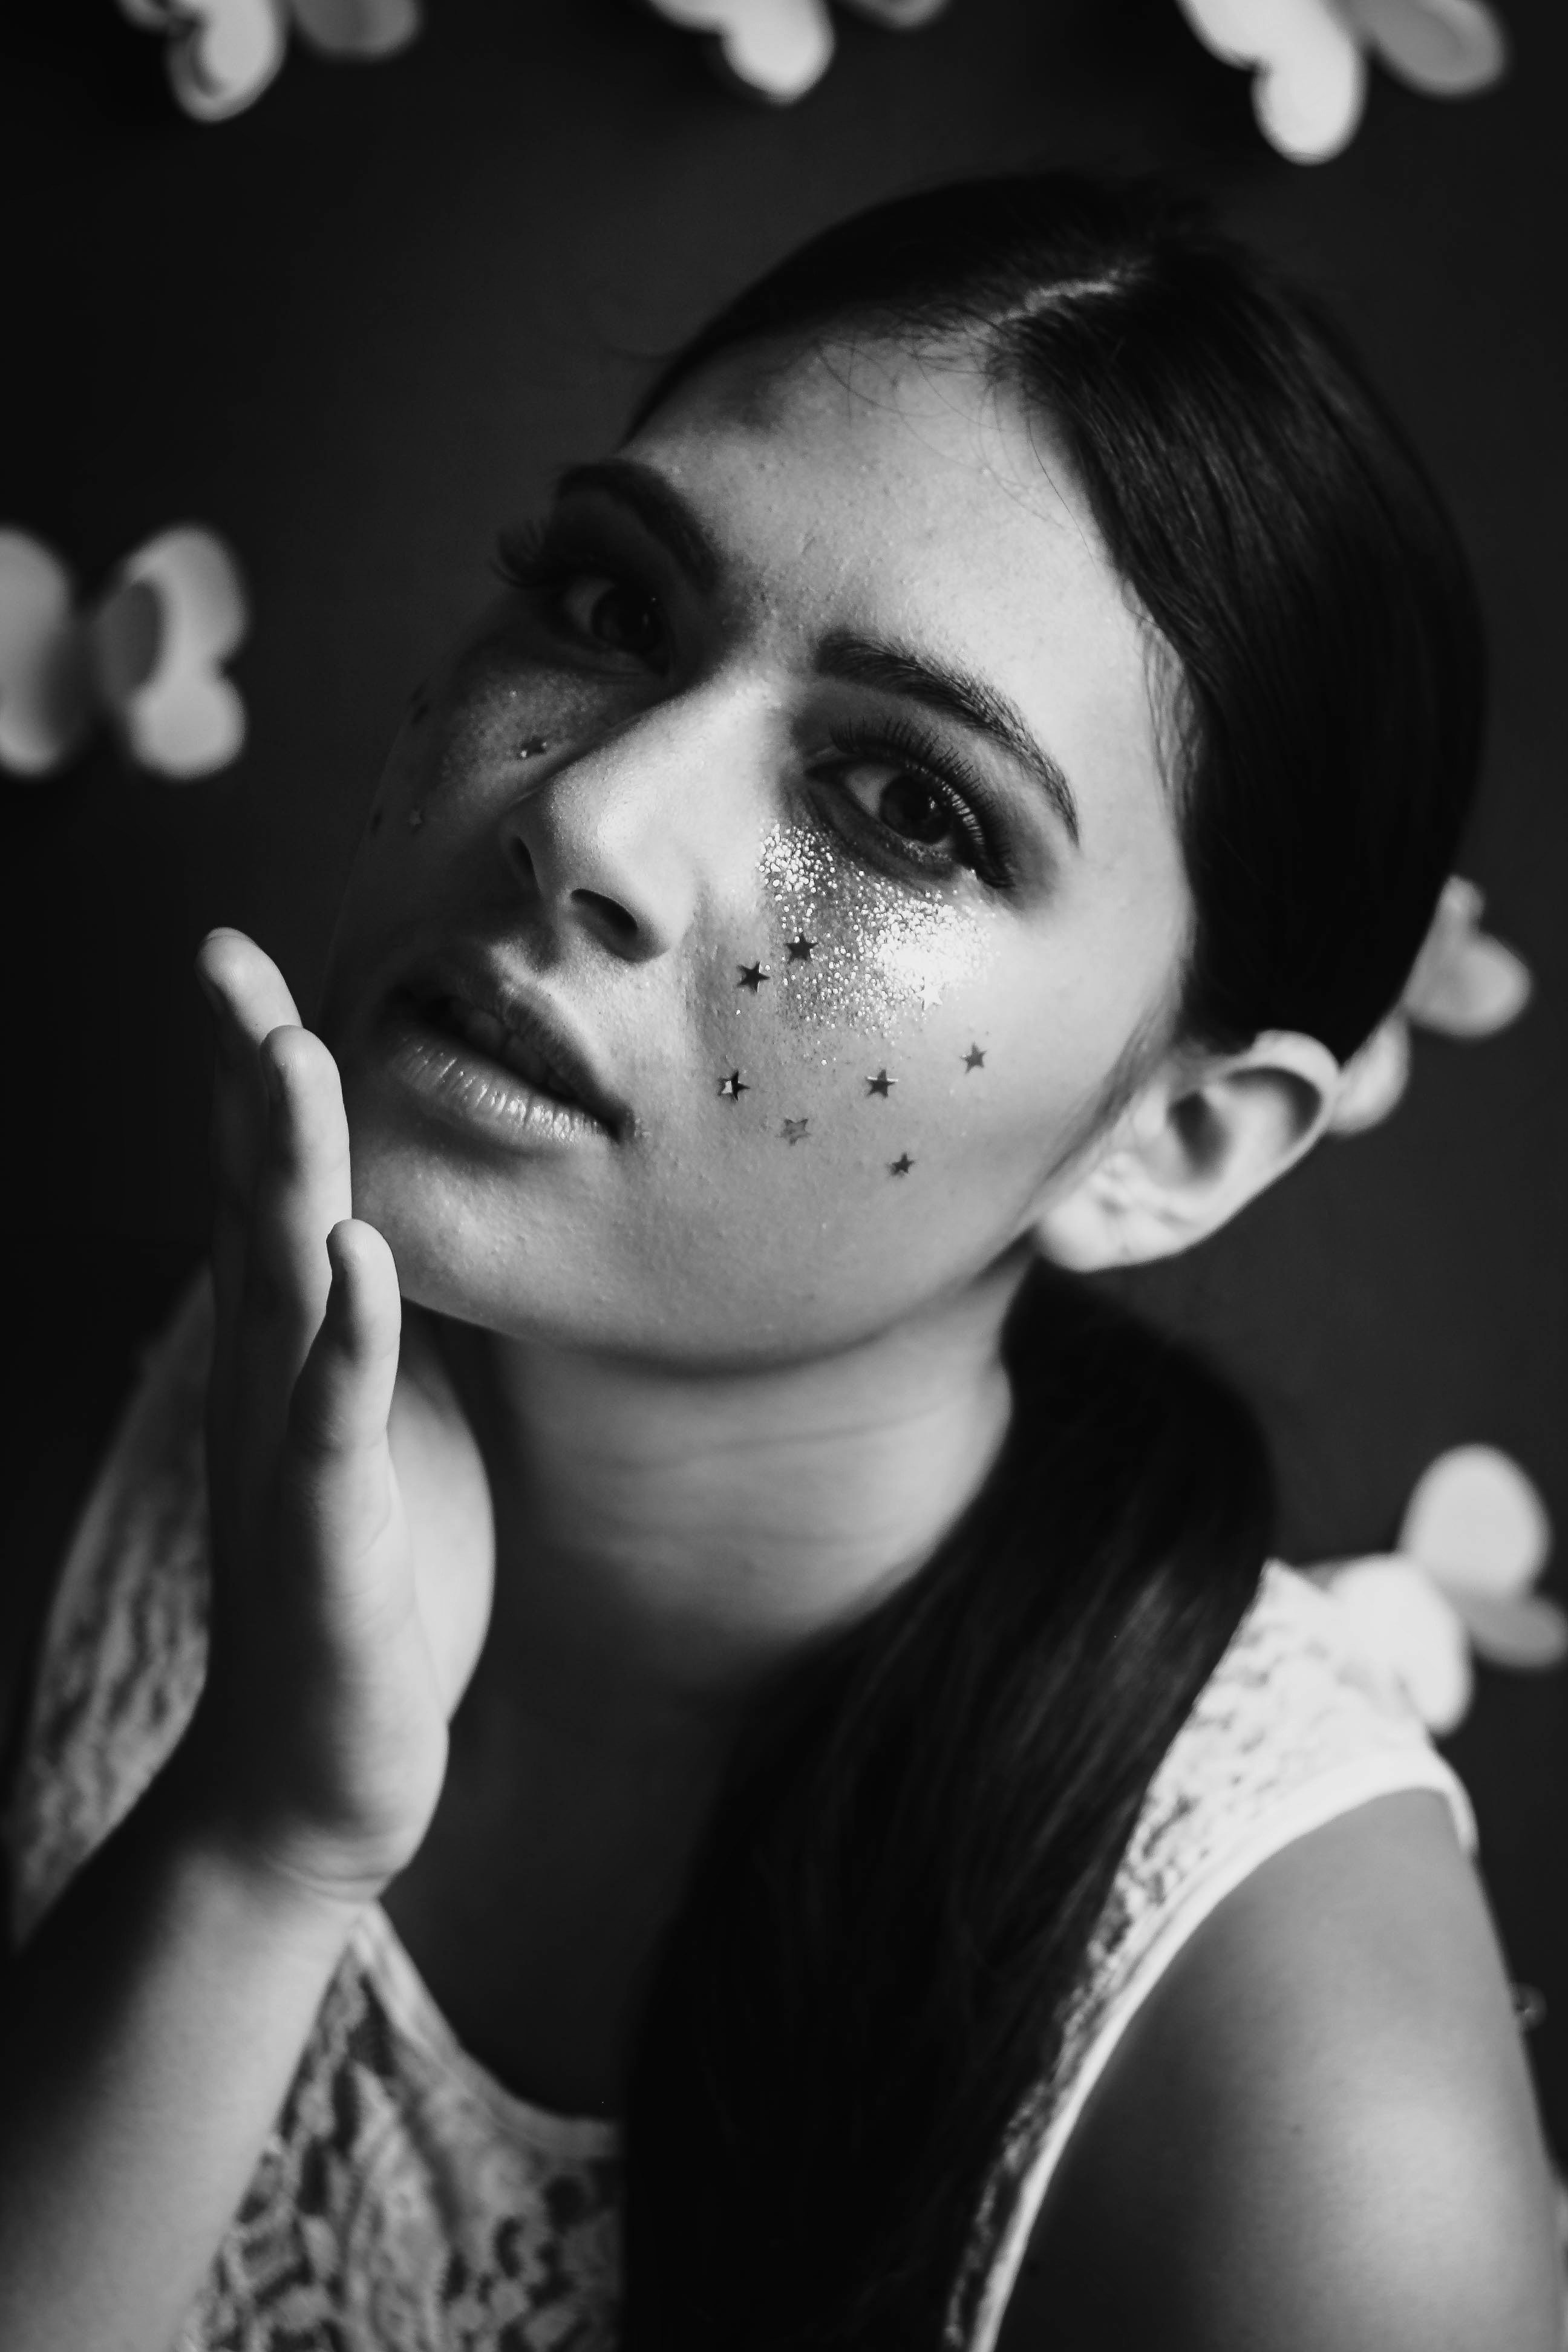 Stars on face. | Source: Pexels